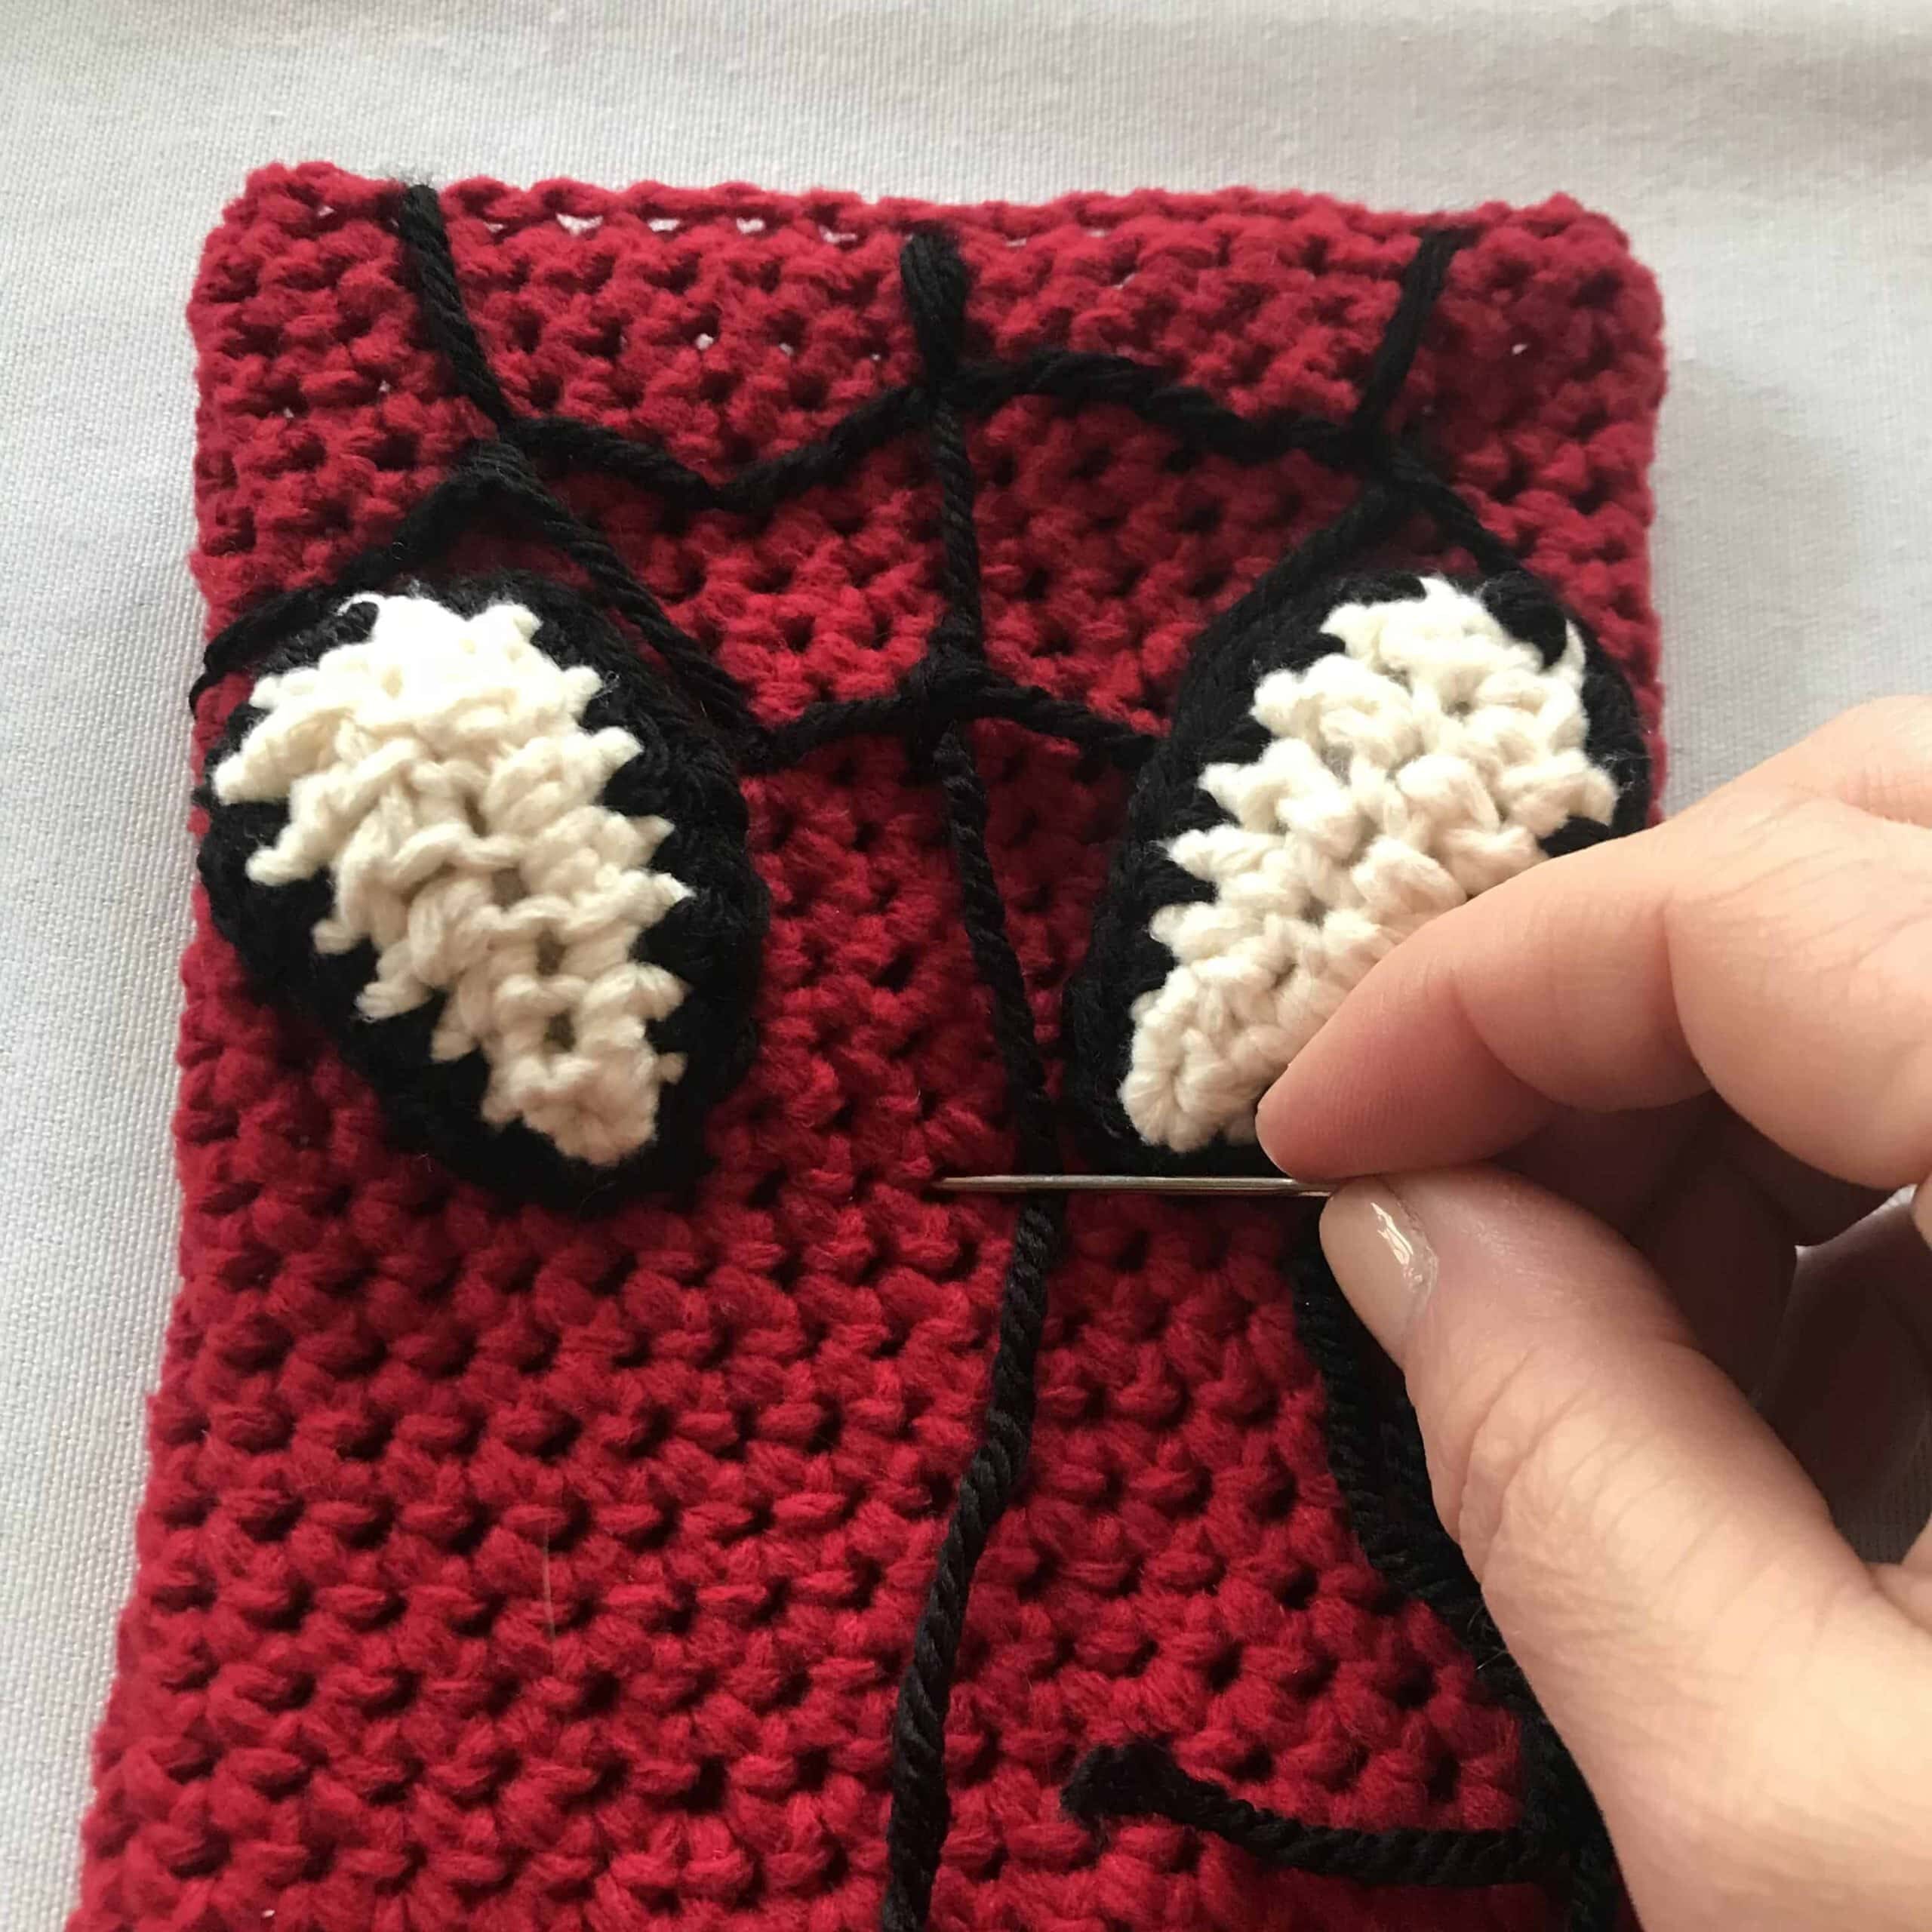 Spderman crochet cast cover tutorial with needle